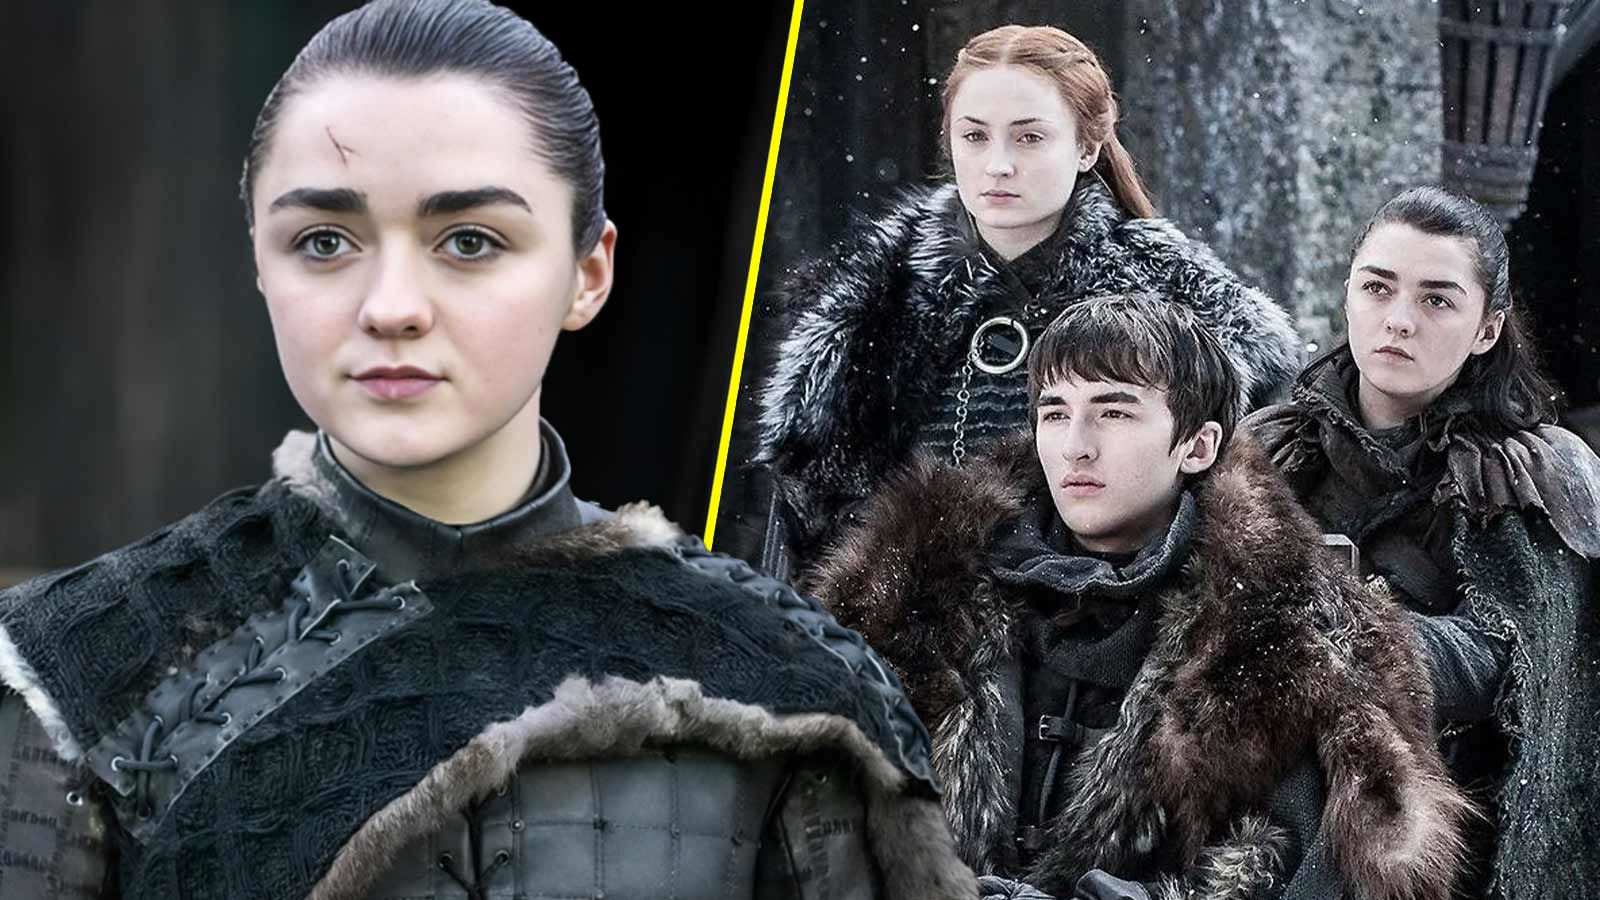 “We had been filming for 4 months…”: Maisie Williams Exposing the Truth Behind a Botched ‘Game of Thrones’ Scene Reveals Why Season 8 Was Such a Disaster